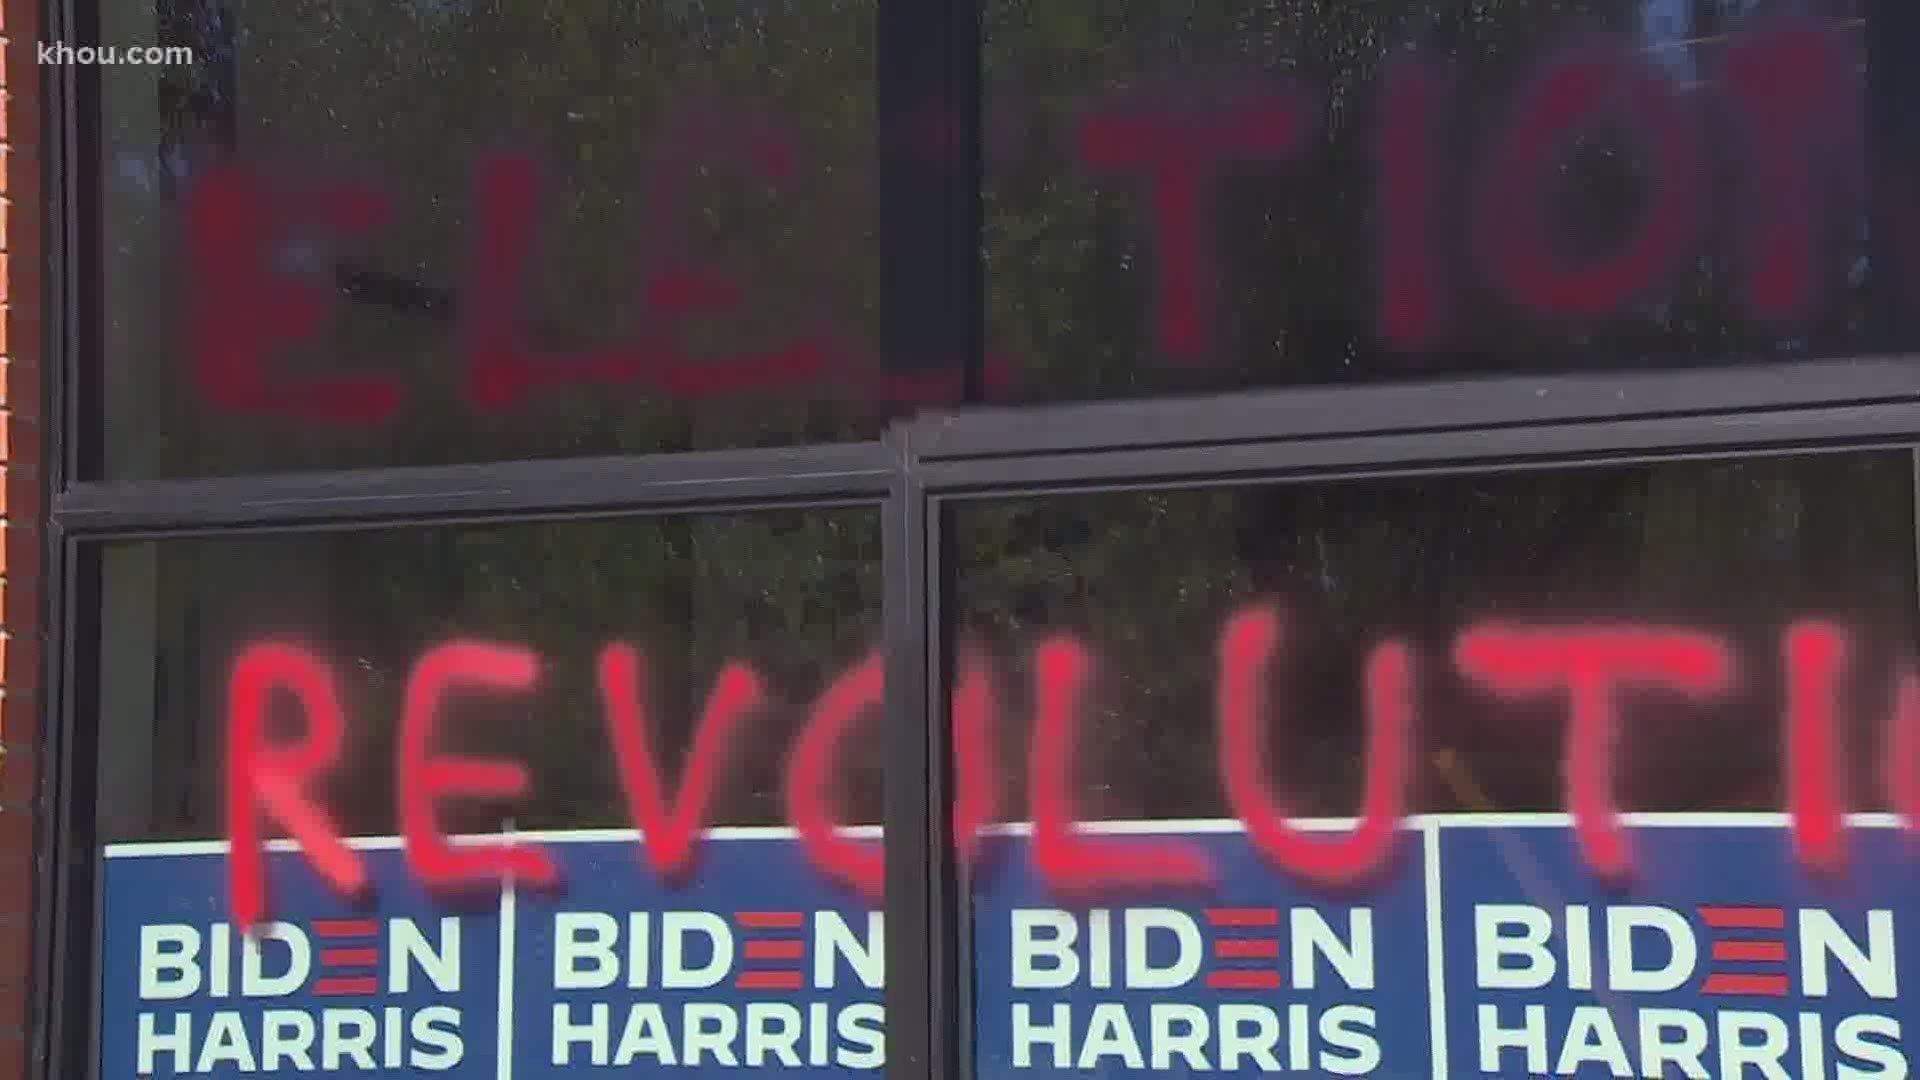 According to the Harris County Democratic Party, workers arrived at their headquarters early Monday to find out it was vandalized. Houston police are investigating.